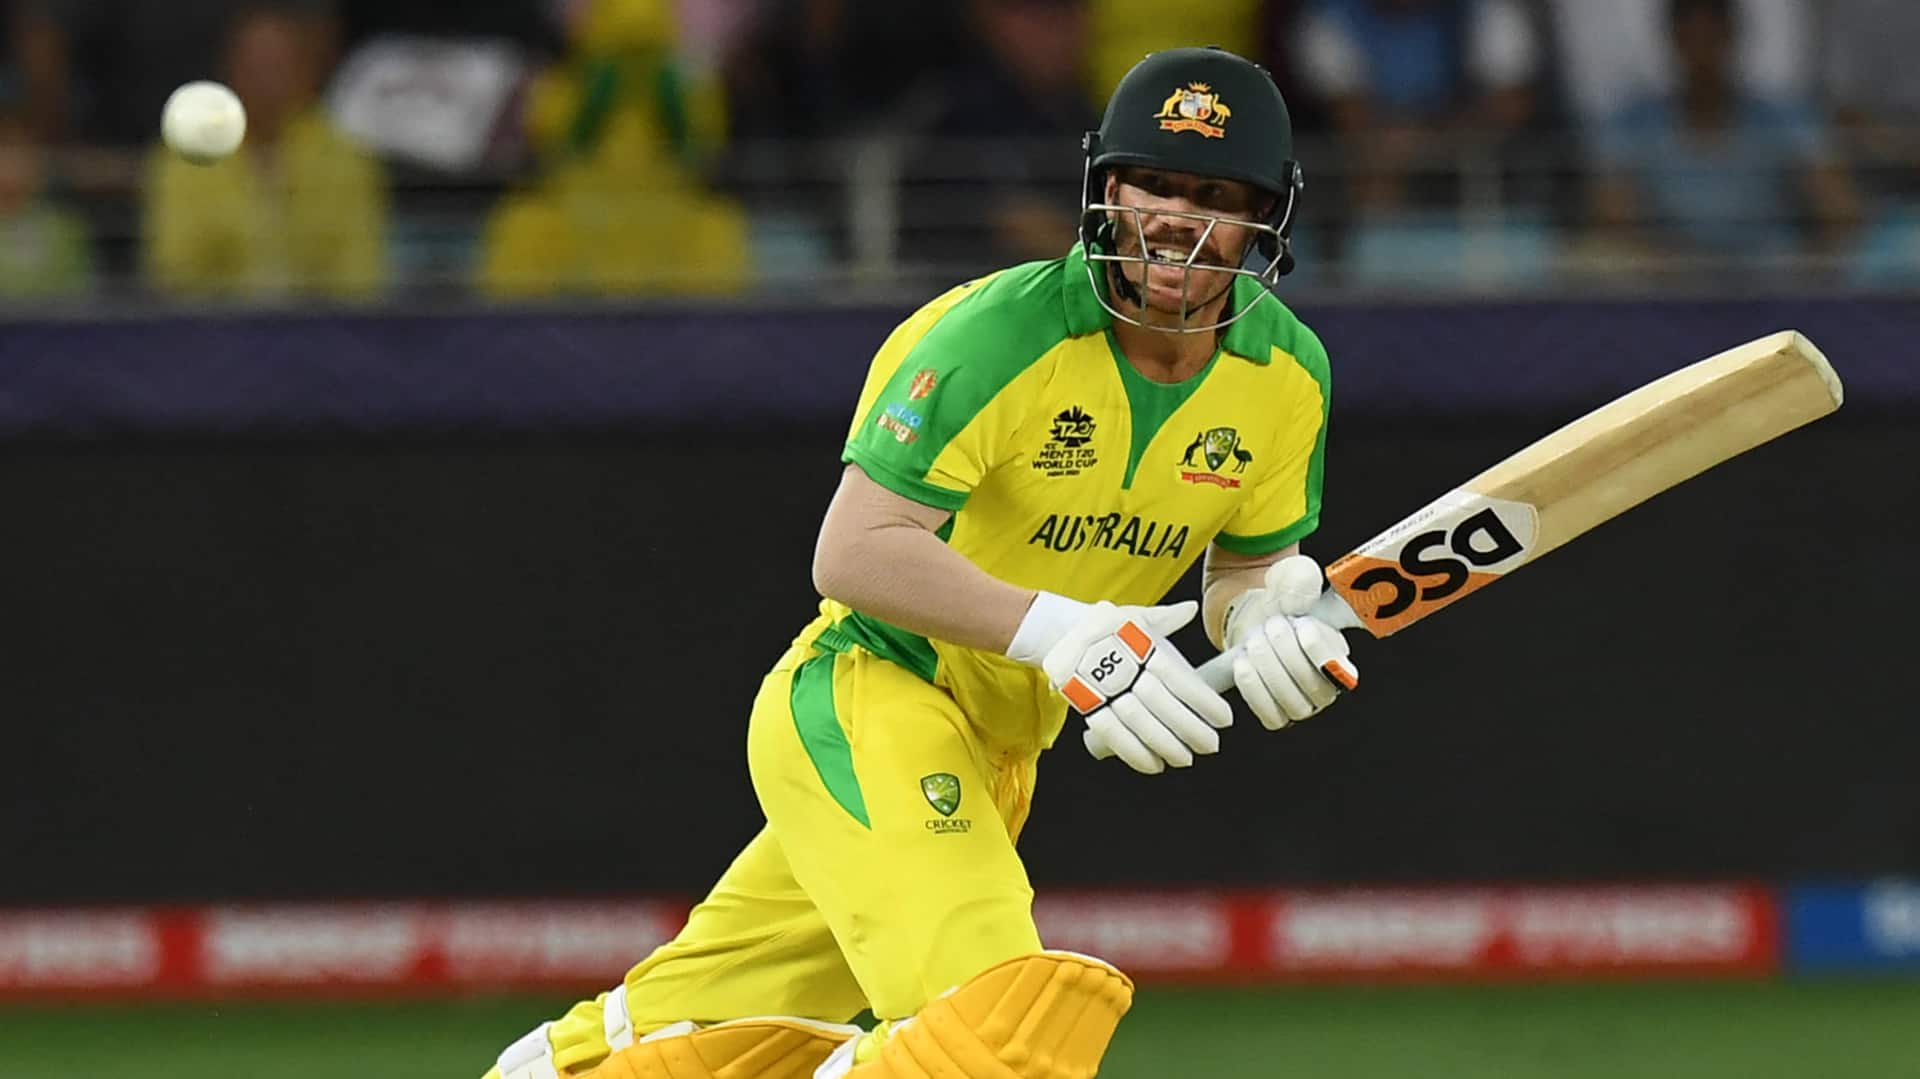 ICC Cricket World Cup, Australia vs Netherlands: Statistical Preview